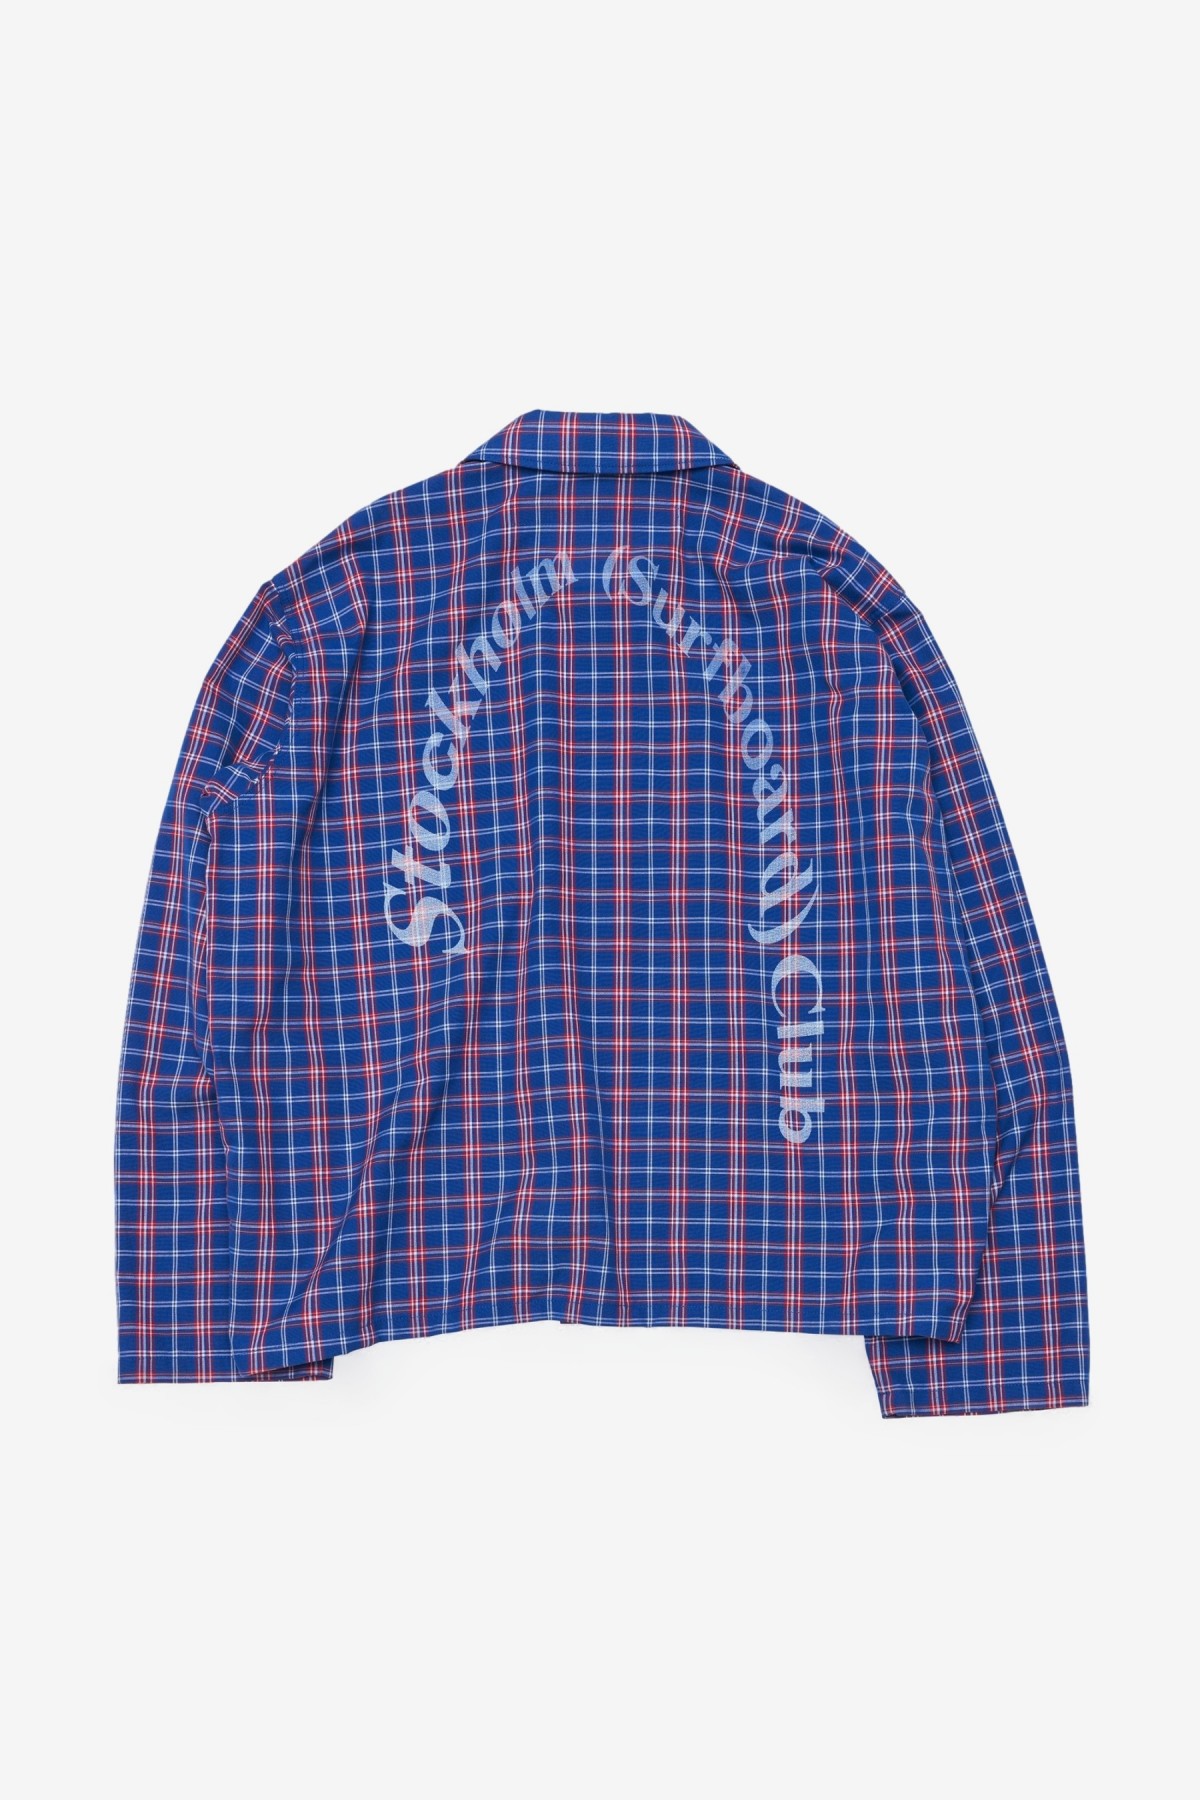 Stockholm Surfboard Club Club Overshirt in Blue Check